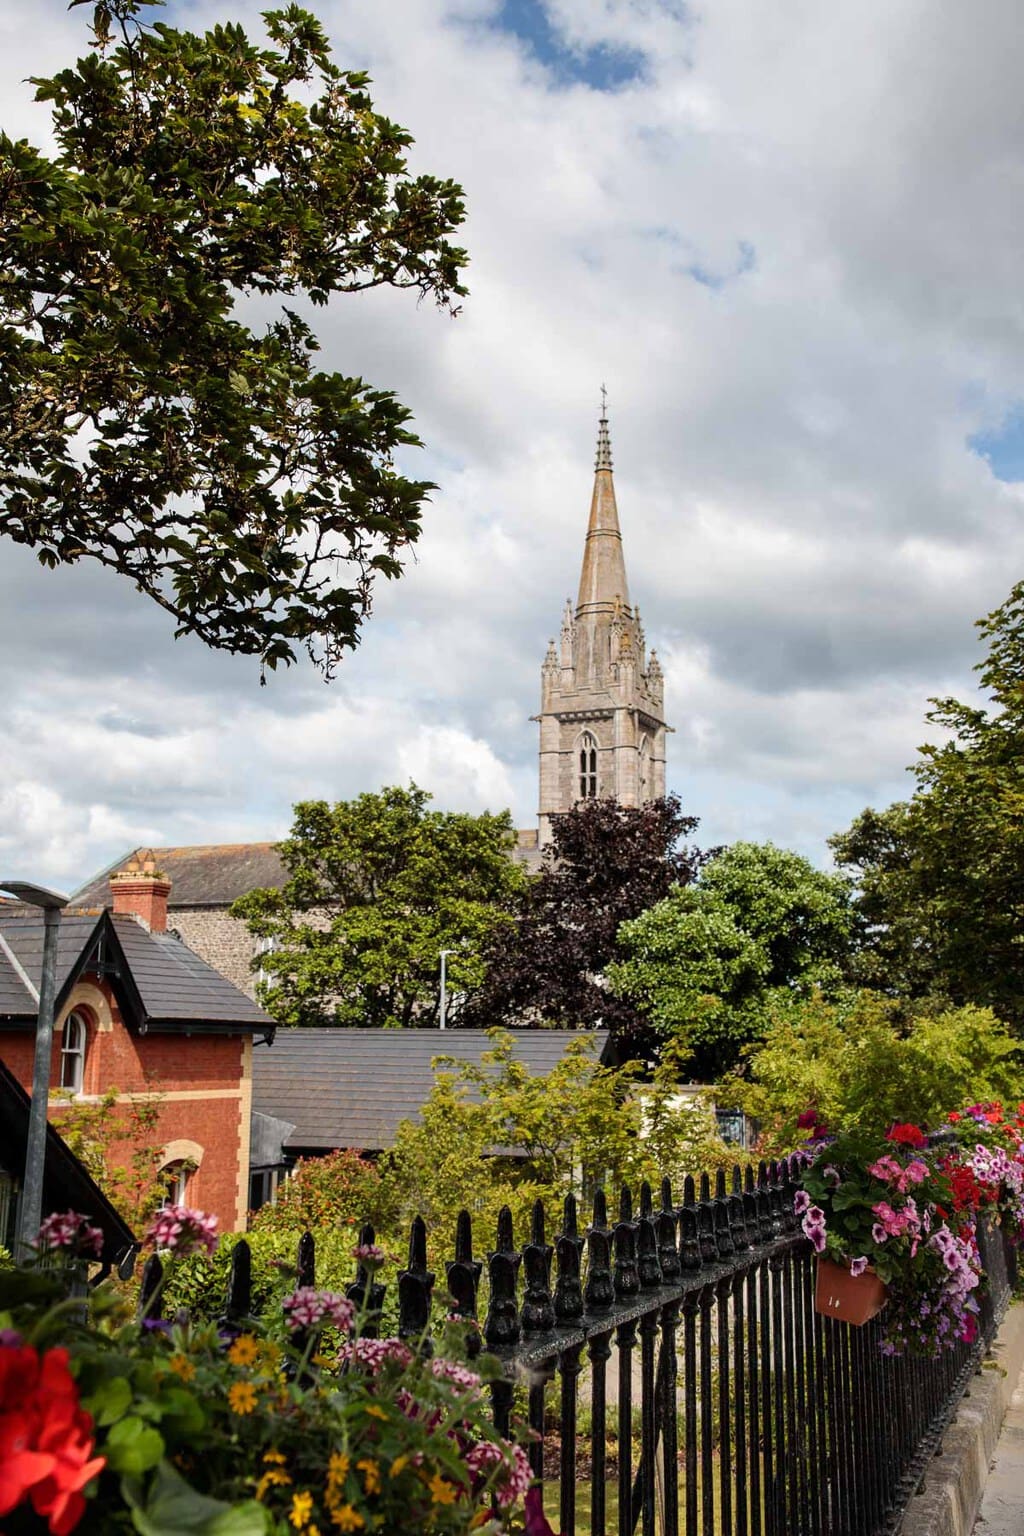 A photo of one of the picturesque churches in Malahide, Ireland.